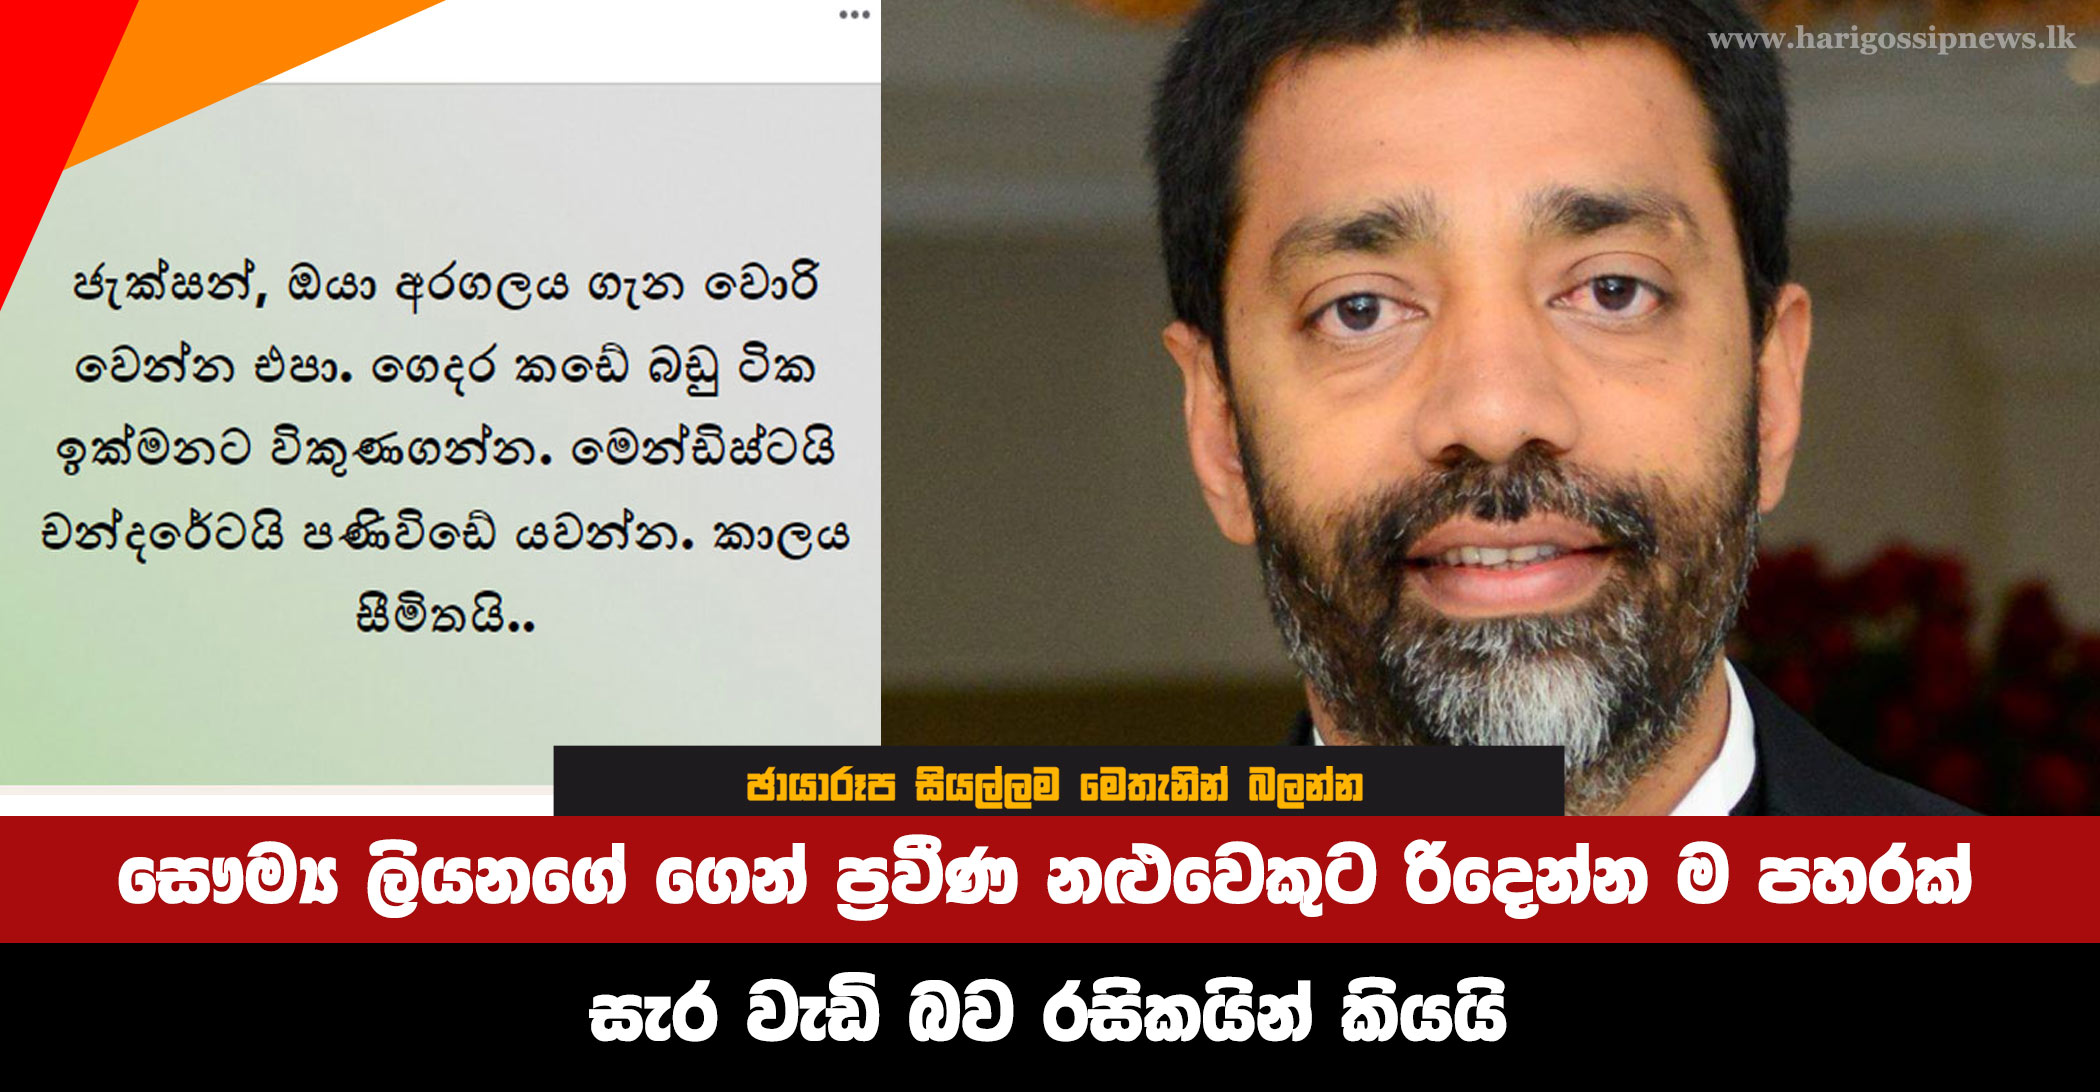 Veteran-actor-gets-a-blow-from-Saumya-Liyanage---Fans-say-it-is-too-harsh